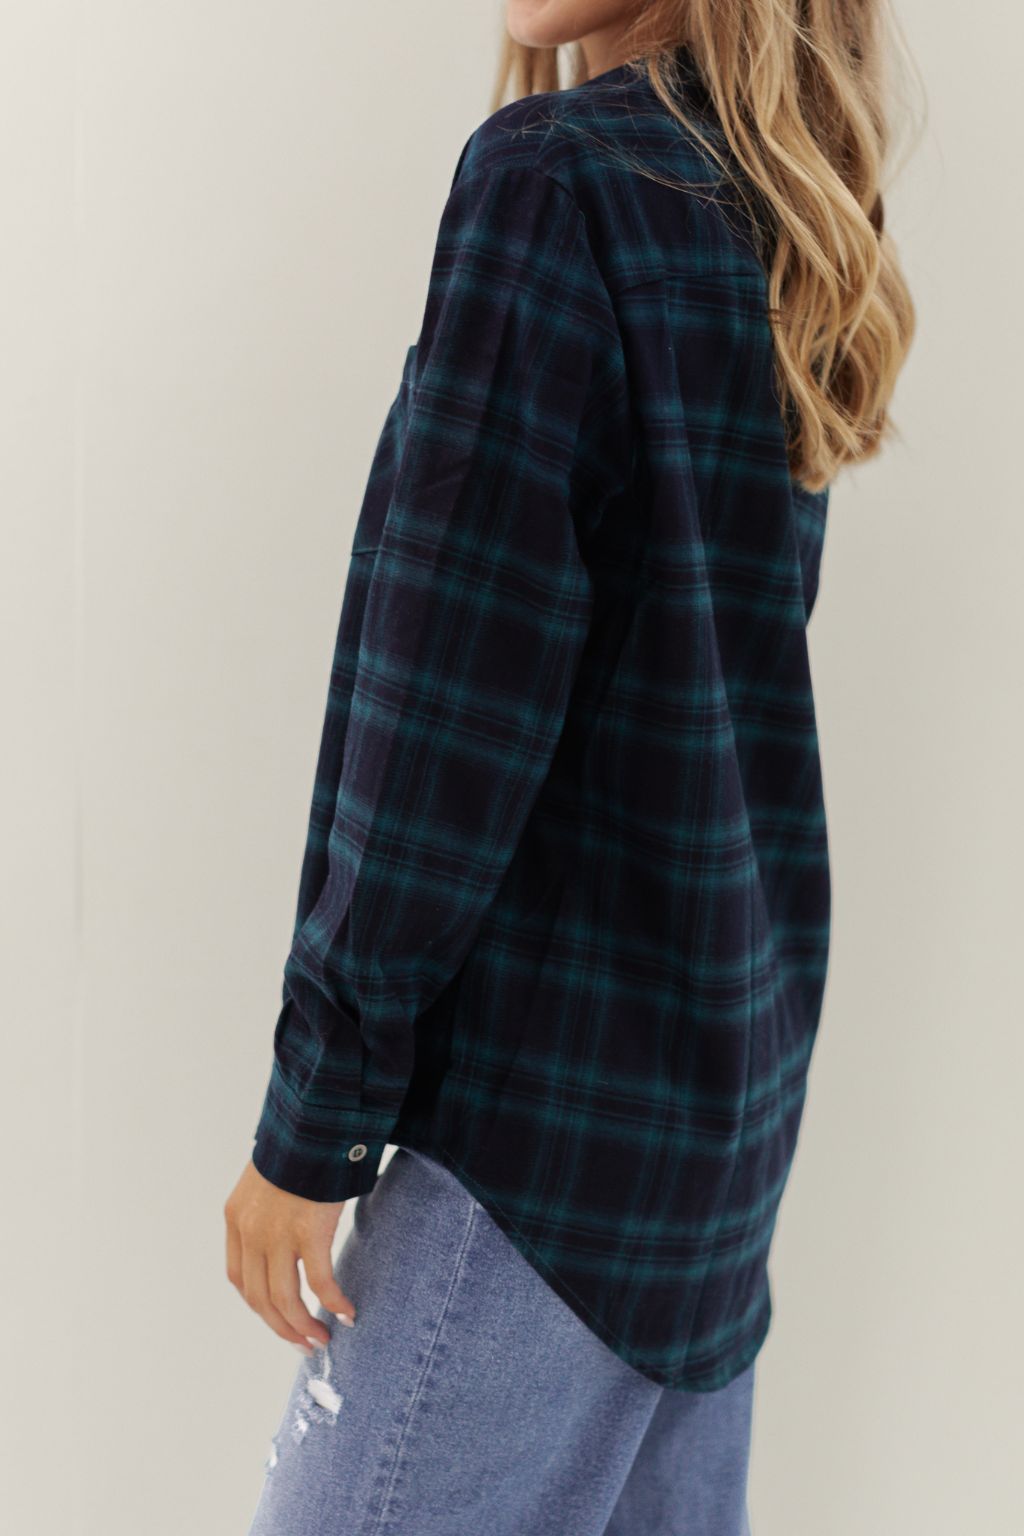 Plaid Button Up Top Green